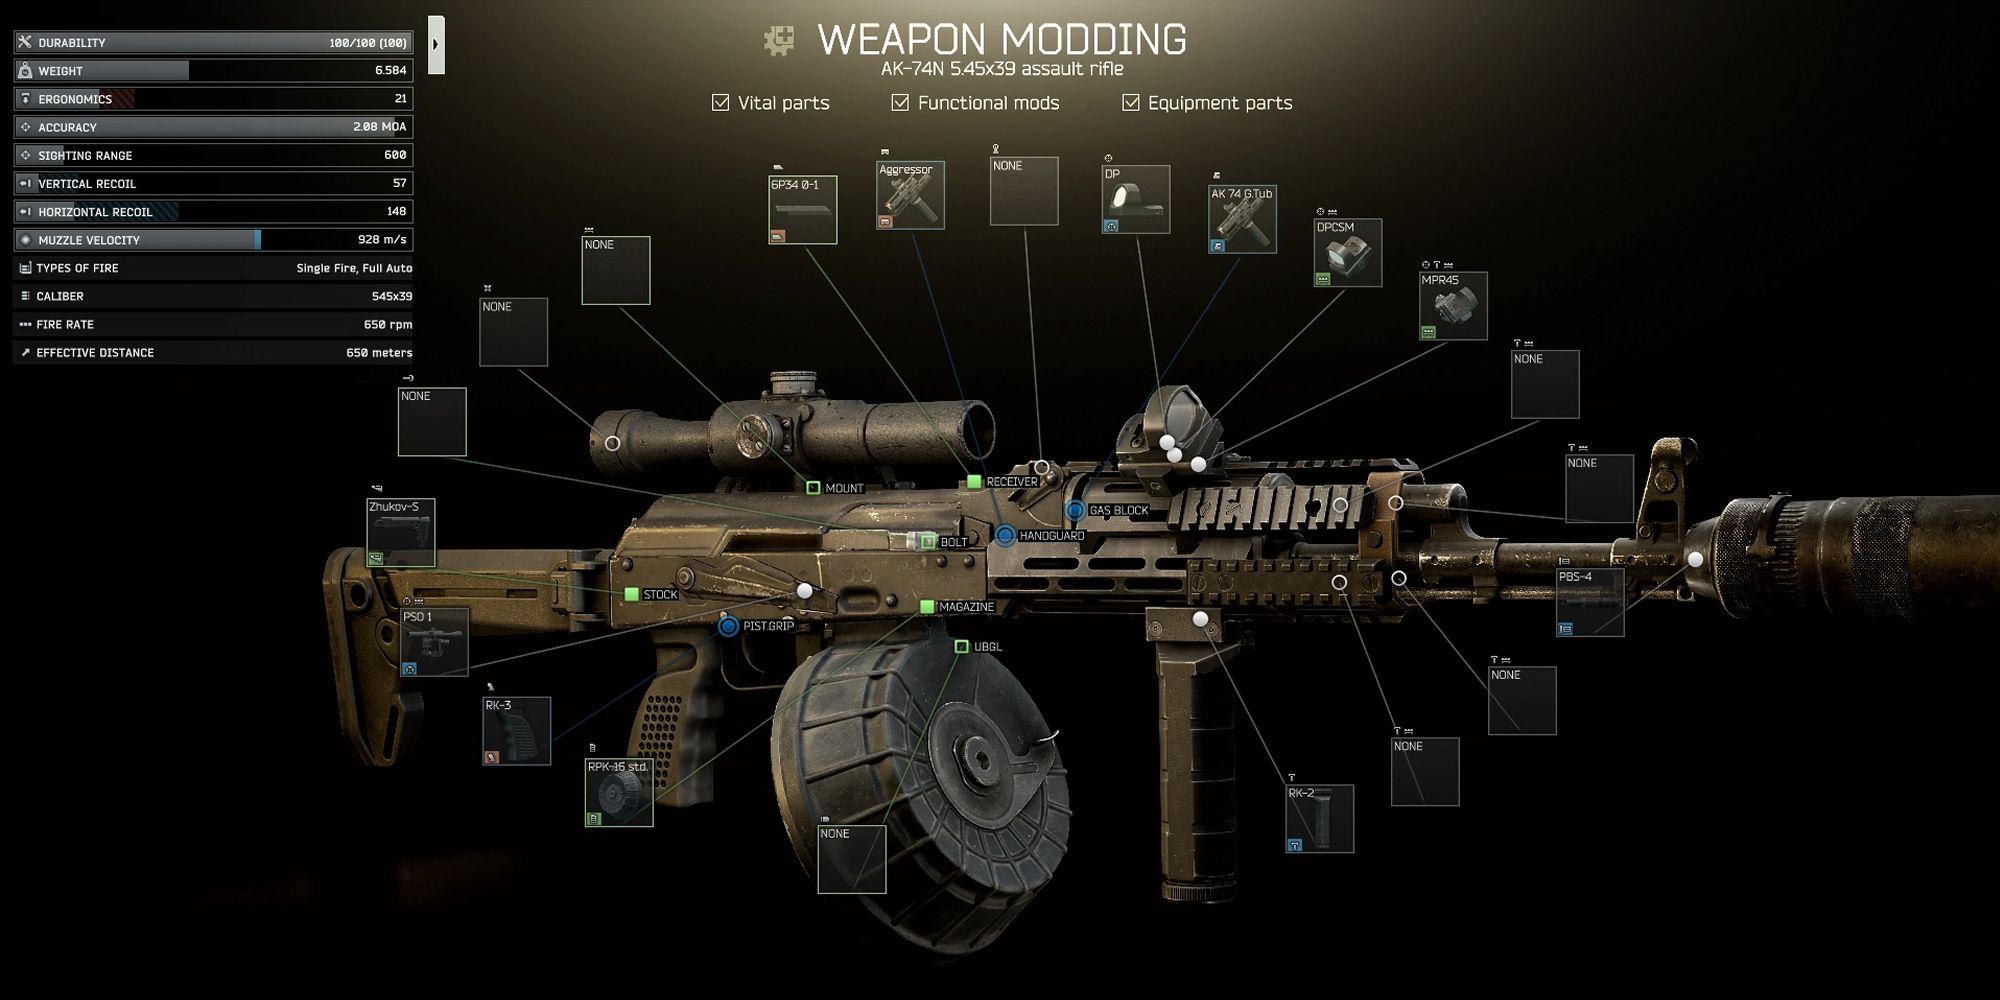 Modding Every Part Of The Weapon